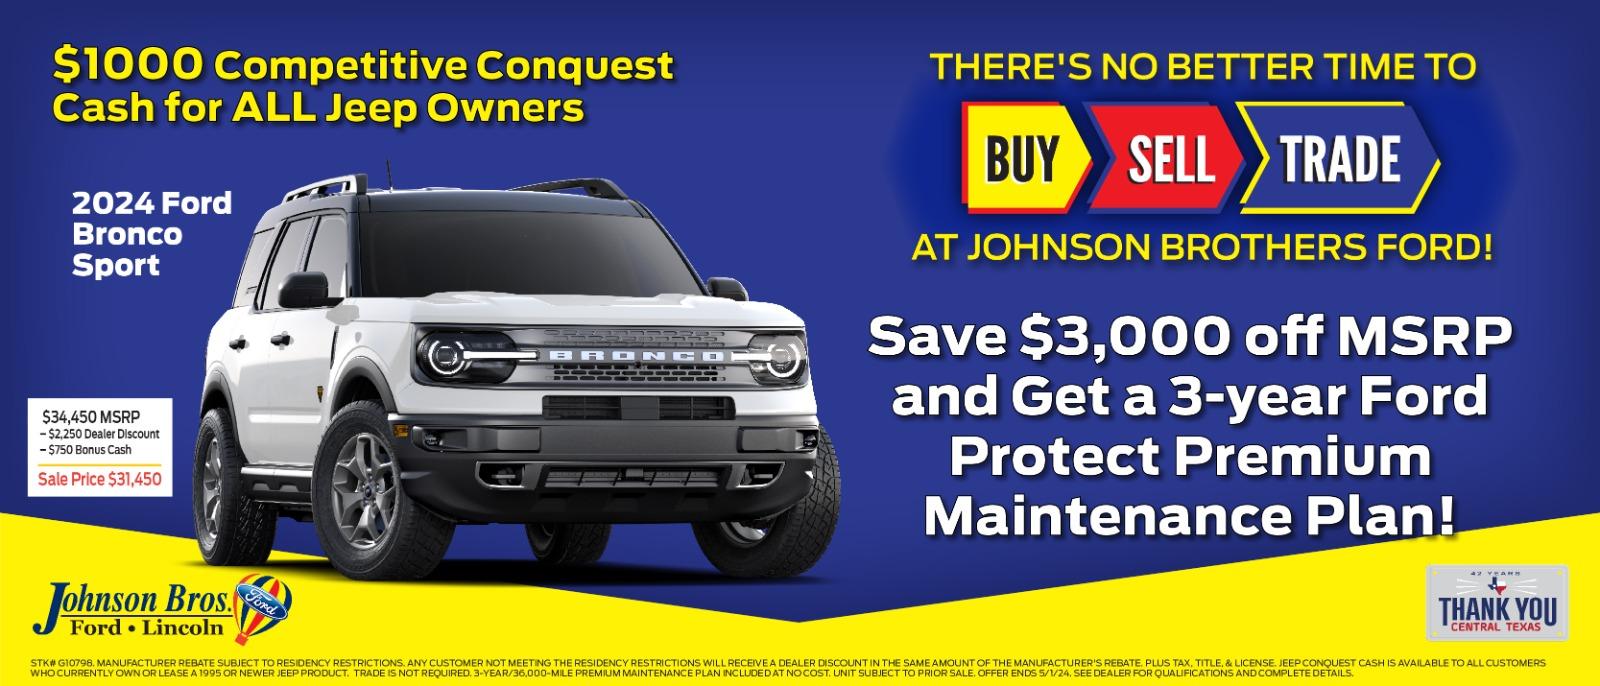 2024 Ford Bronco
$1,000 competitive conquest cash for all jeep owners 

Save $3,000 off MSRP and get a 3-year Ford Protect Premium Maintenance Plan!